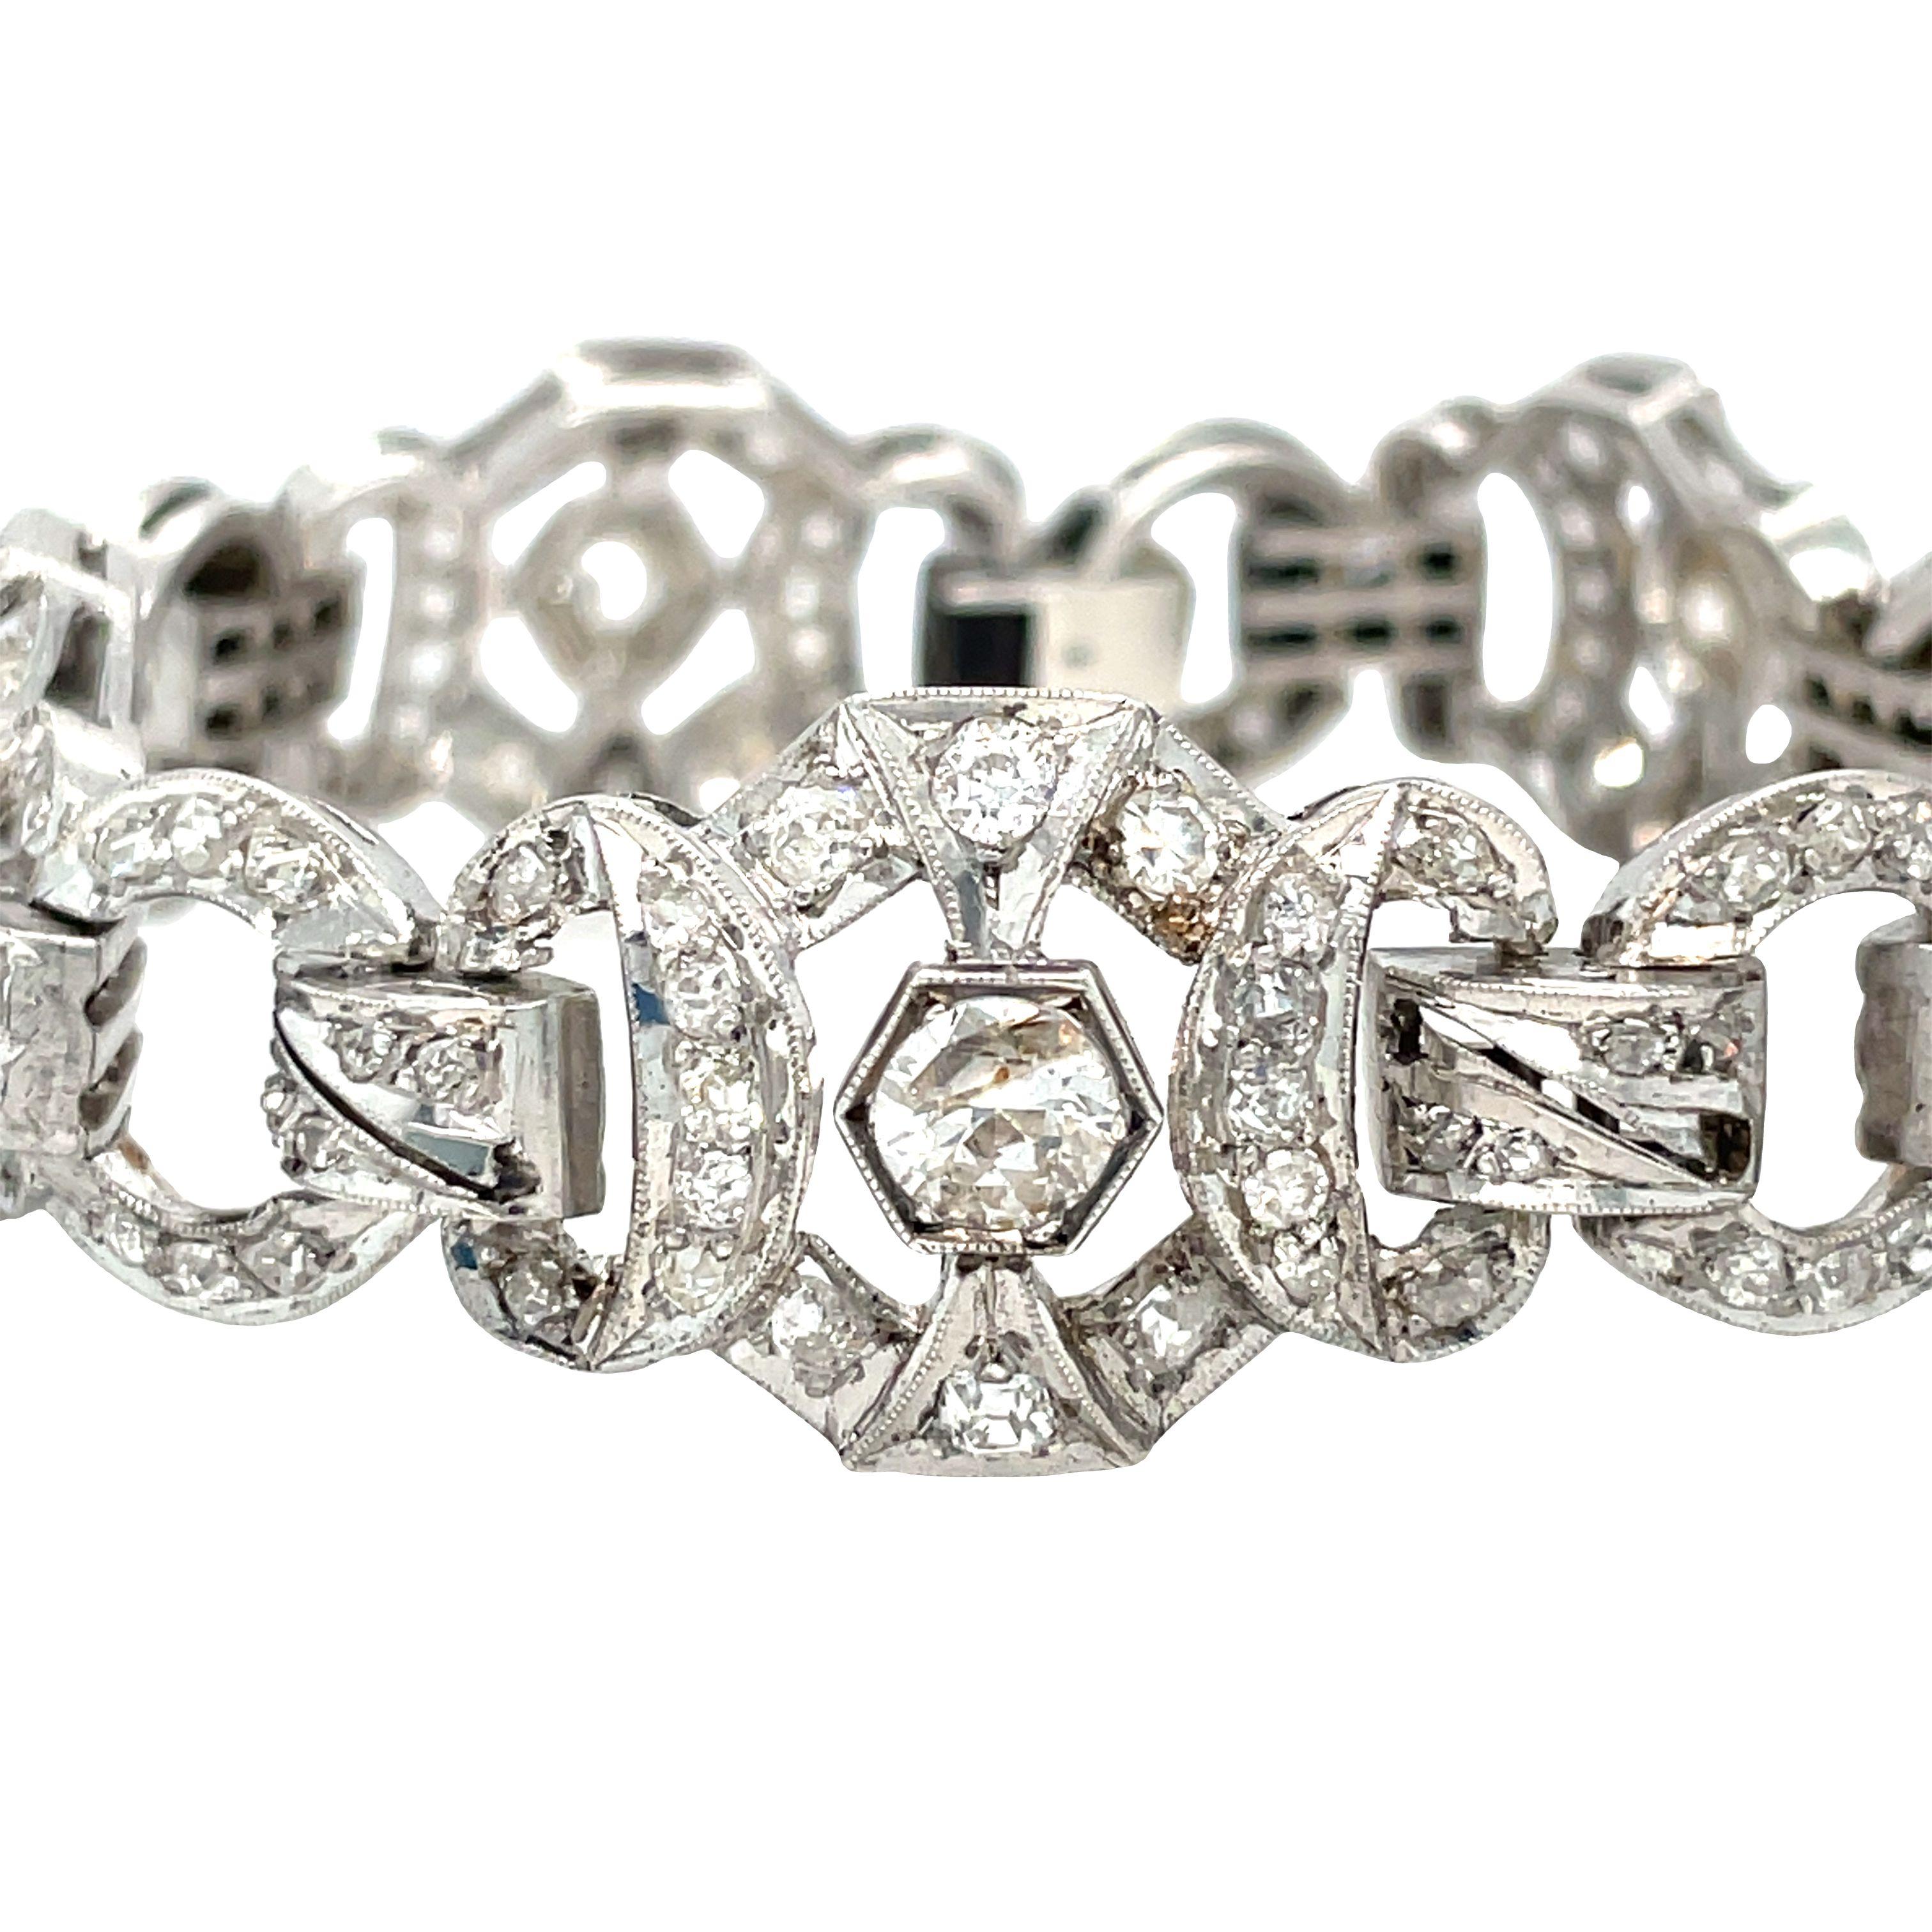 A very pretty Edwardian open link diamond bracelet sparkling with 136 bead set Old European and Mine cut diamonds. Mounted in silver?? with an approximate total diamond weight of 4.40 carats K-L-M color and I1 clarity. The stones are all prong set